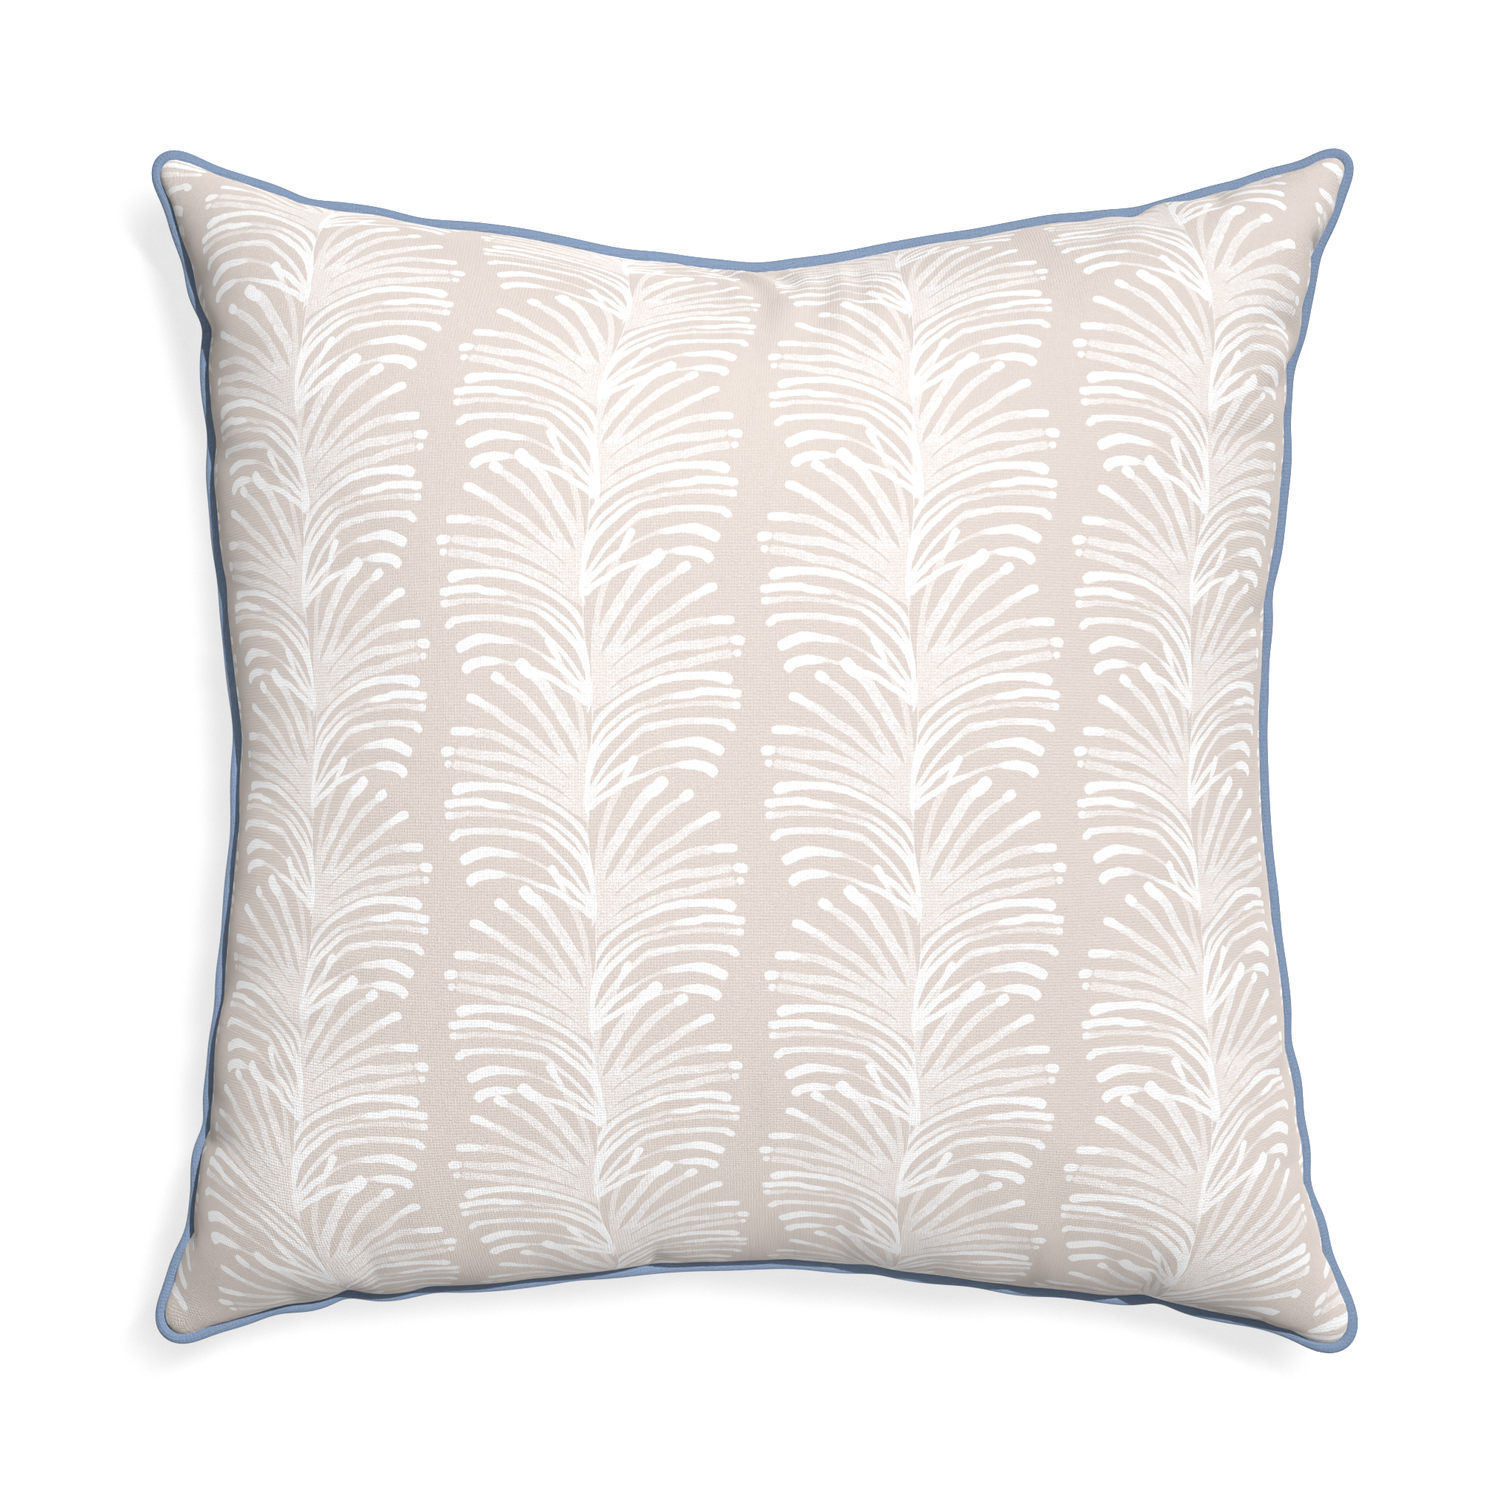 Euro-sham emma sand custom pillow with sky piping on white background